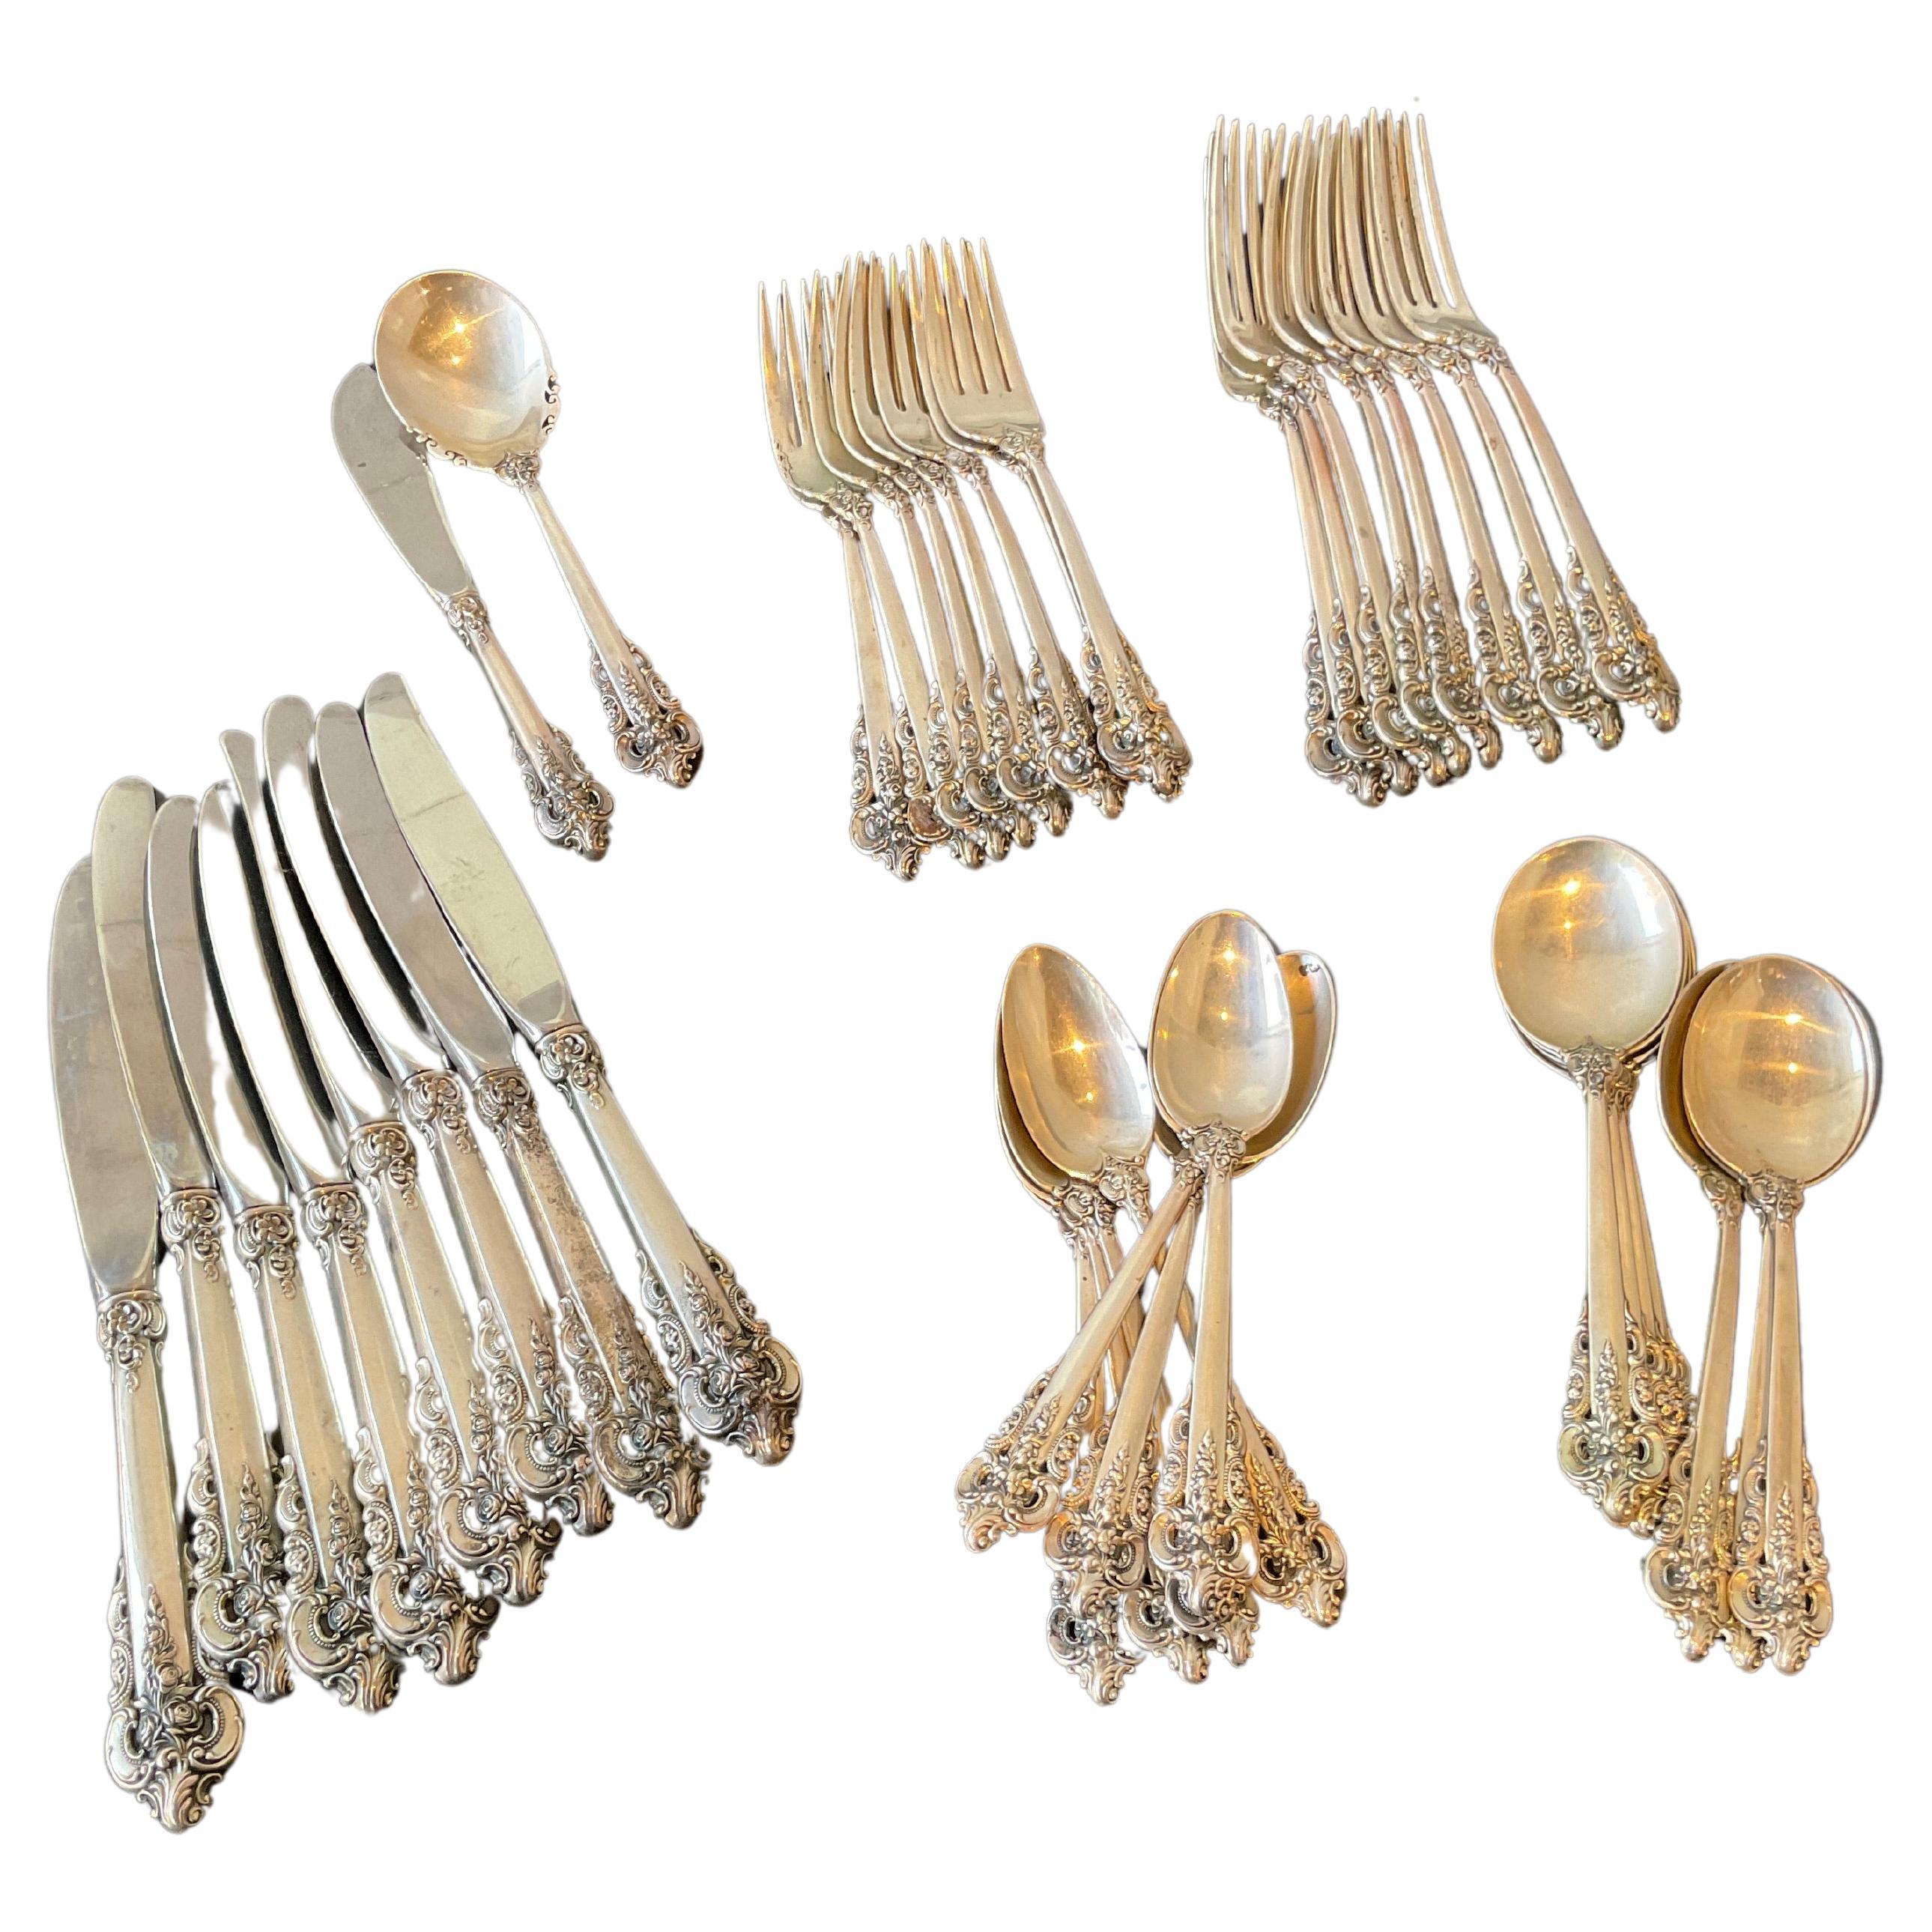 Wallace Sterling Grande Baroque Service For 8 For Sale